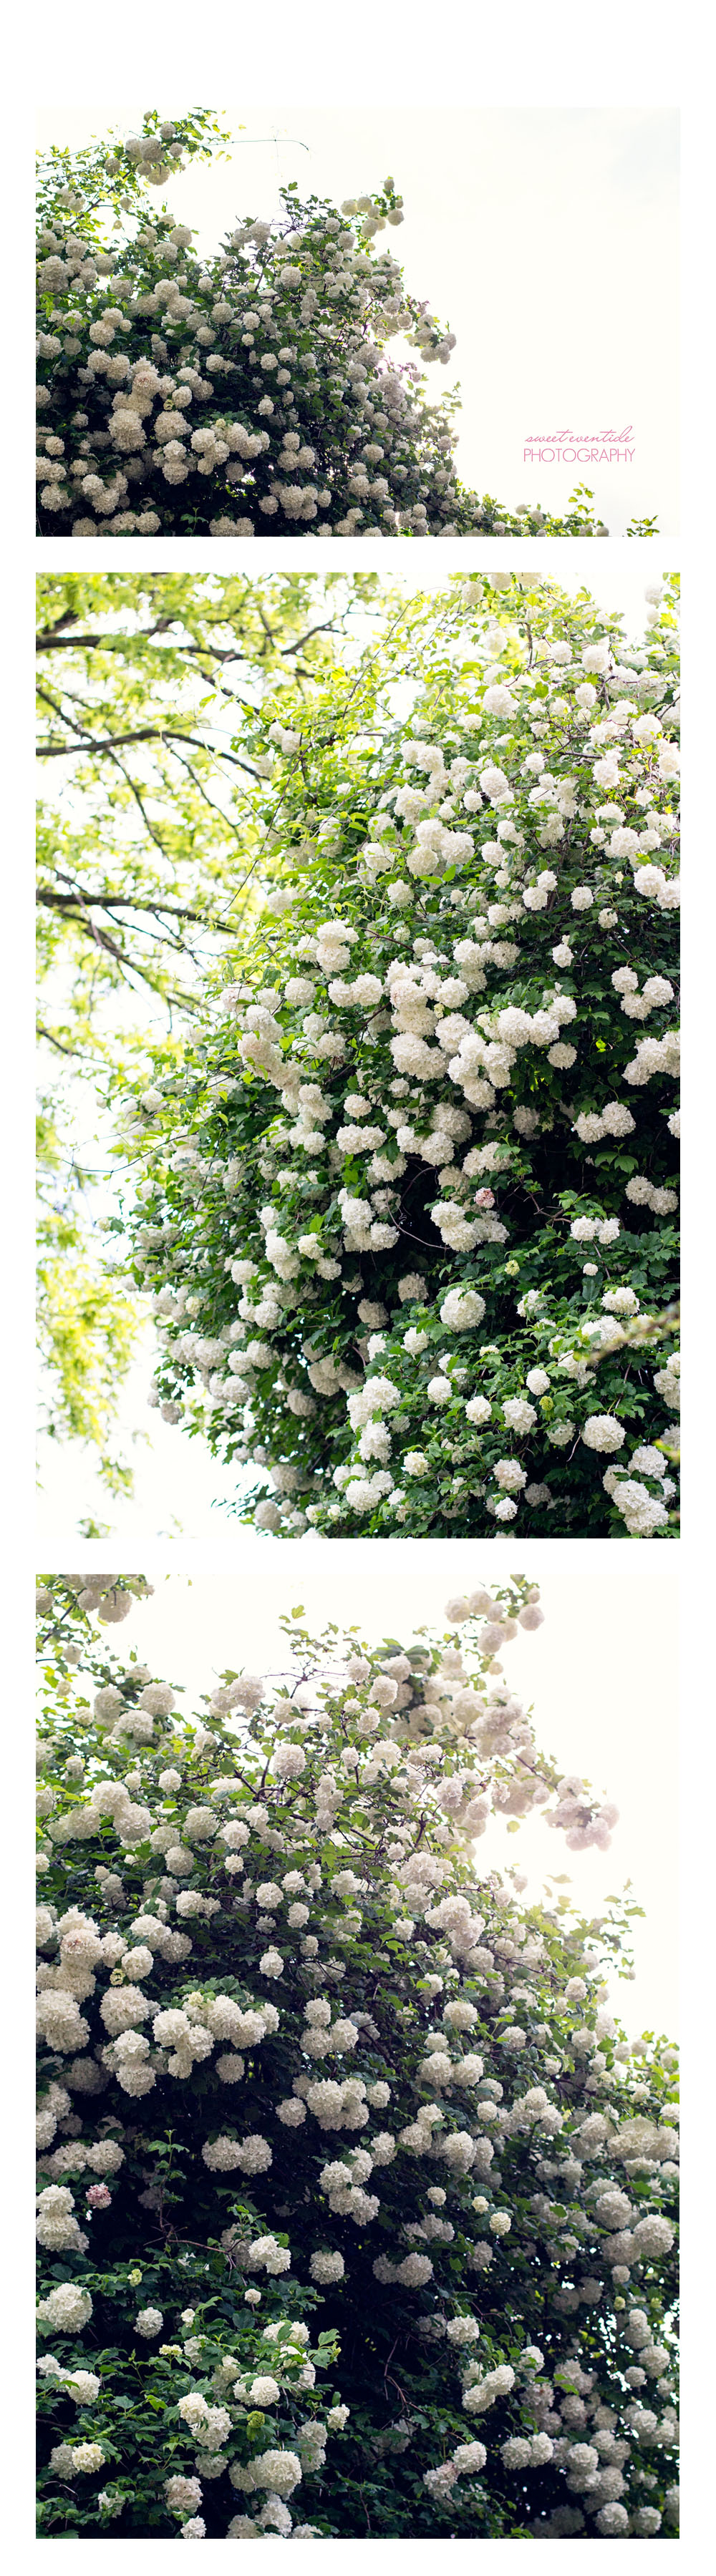 White Rhododendrons photo collage by Jessica Nichols, Sweet Eventide Photography